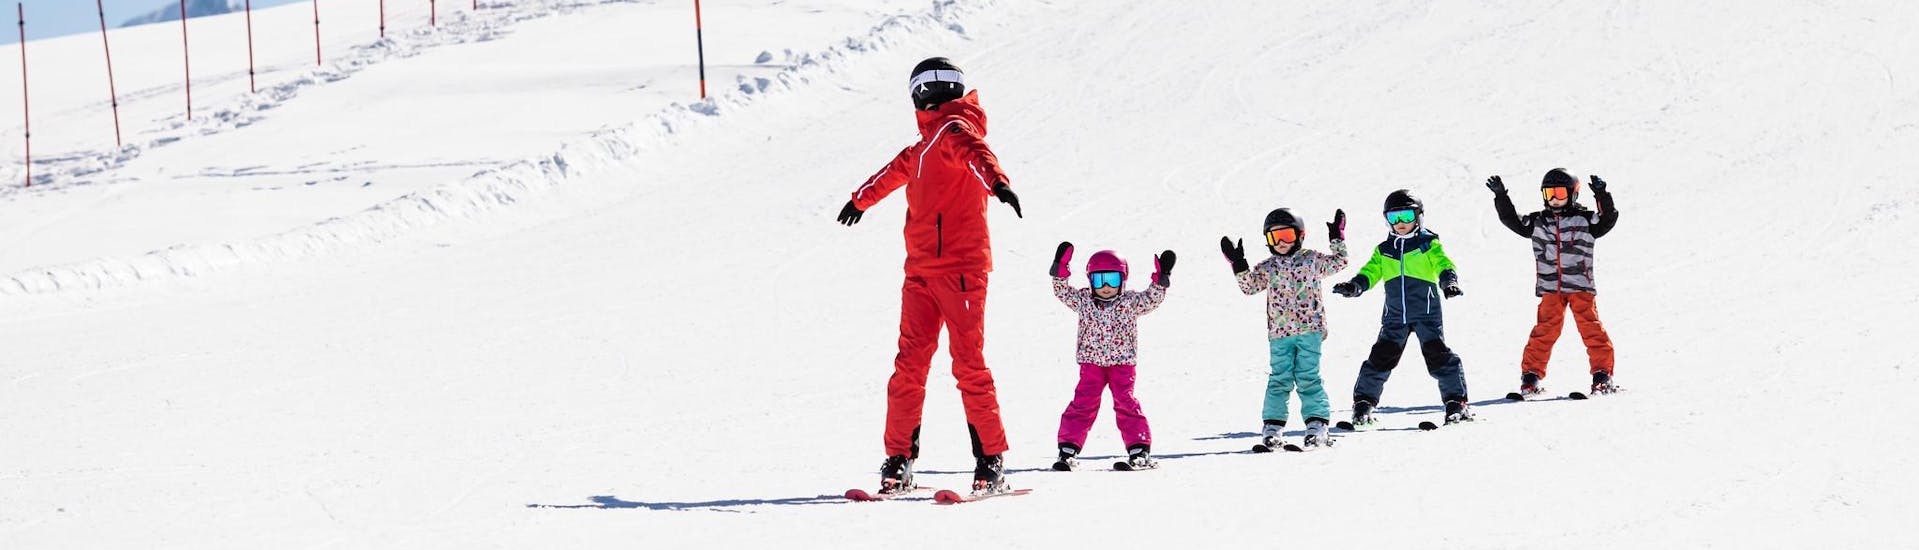 Ski instructor and kids skiing down the slopes during a ski lesson.